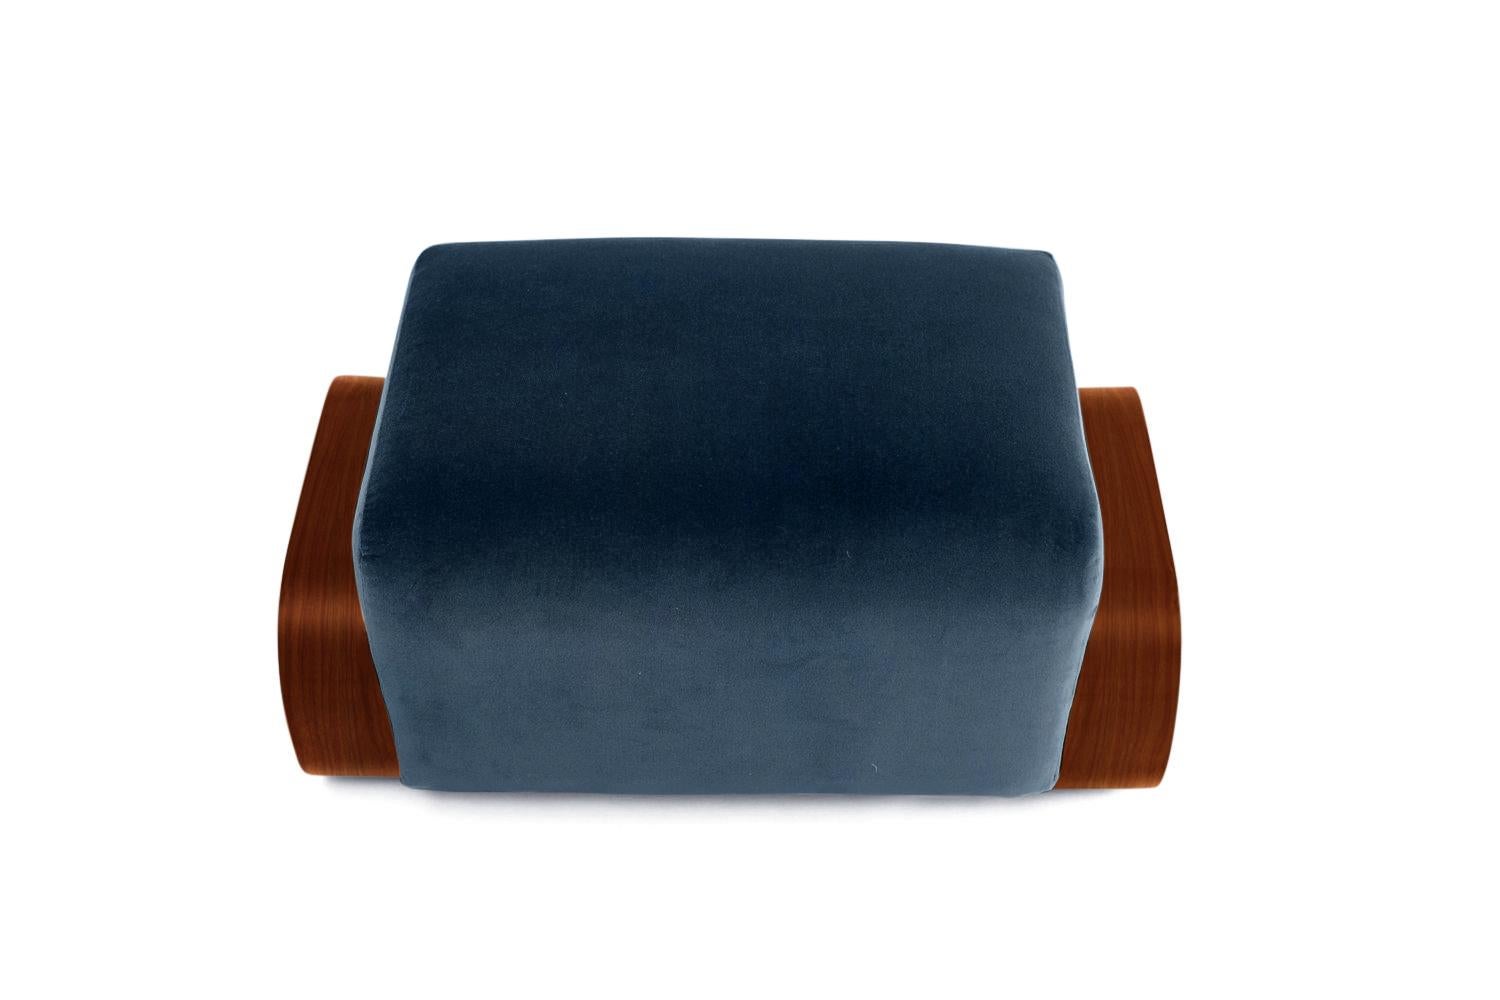 The Cayenne lounge chair and ottoman are a deft homage to midcentury design. Designer Marie Burgos has taken the clean lines that defined seating designs of that era and given them a luxurious new simplicity. The plush upholstery — available in a